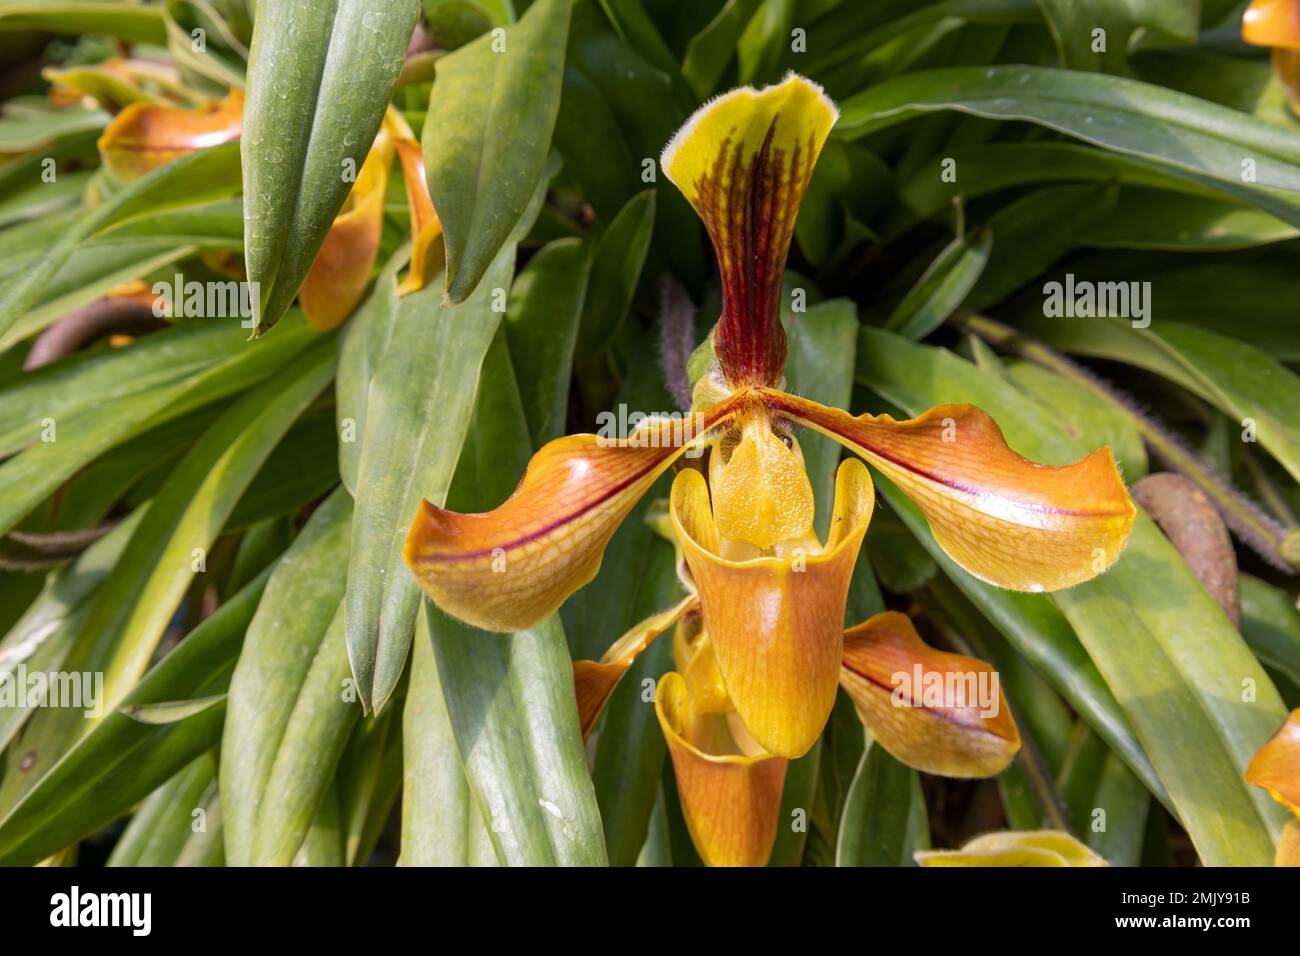 Ward's Paphiopedilum Orchid in bloom, Orchid flower bloom close-up view Stock Photo